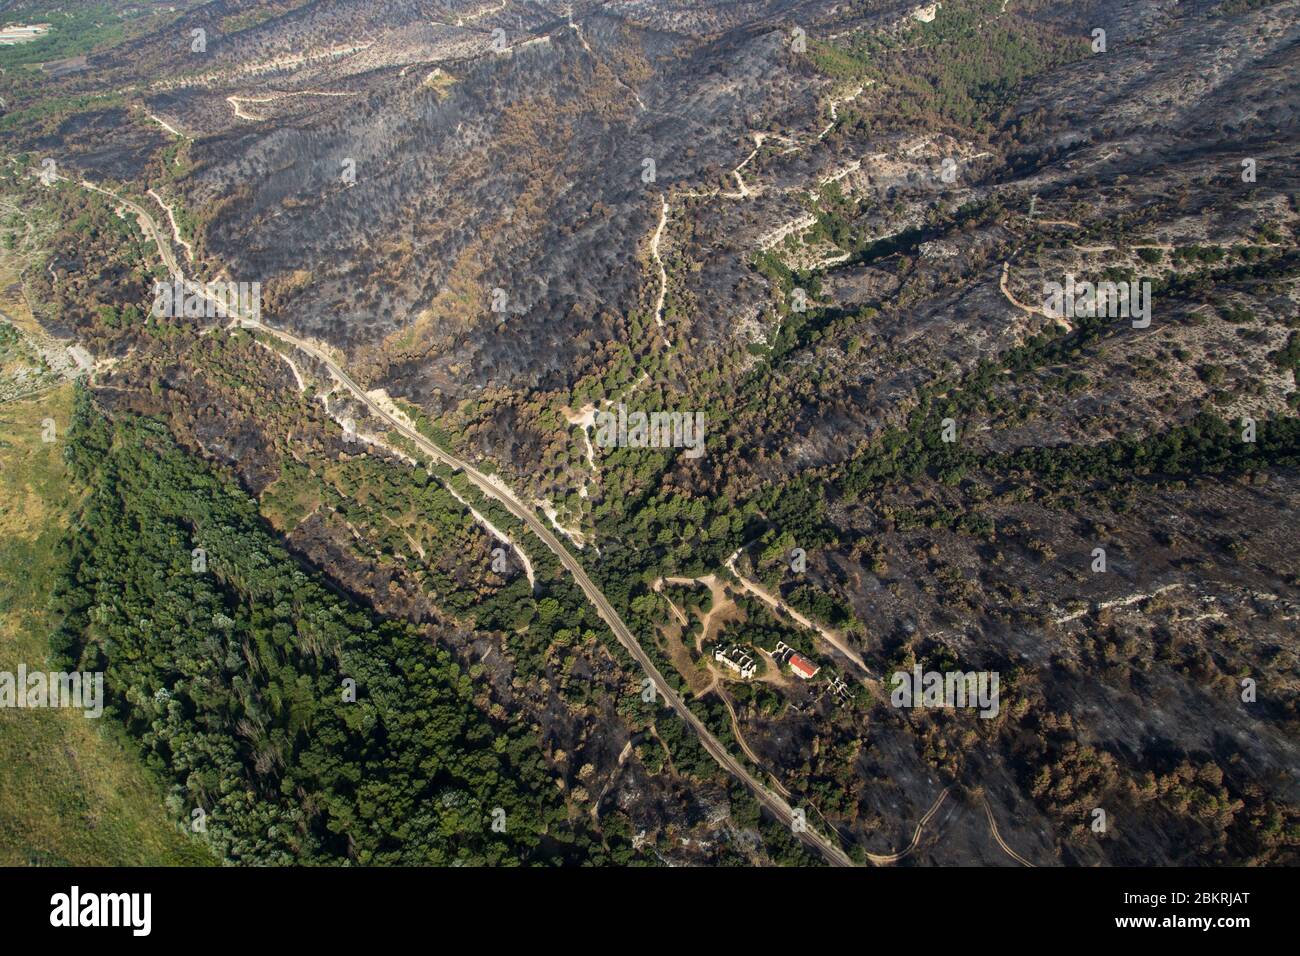 France, Vaucluse, Luberon, the forest fire of July 24, 2017 between Mirabeau and the Bastidonne. the fire ravaged 1300 ha, flyover by motorized paraglider (aerial view) Stock Photo